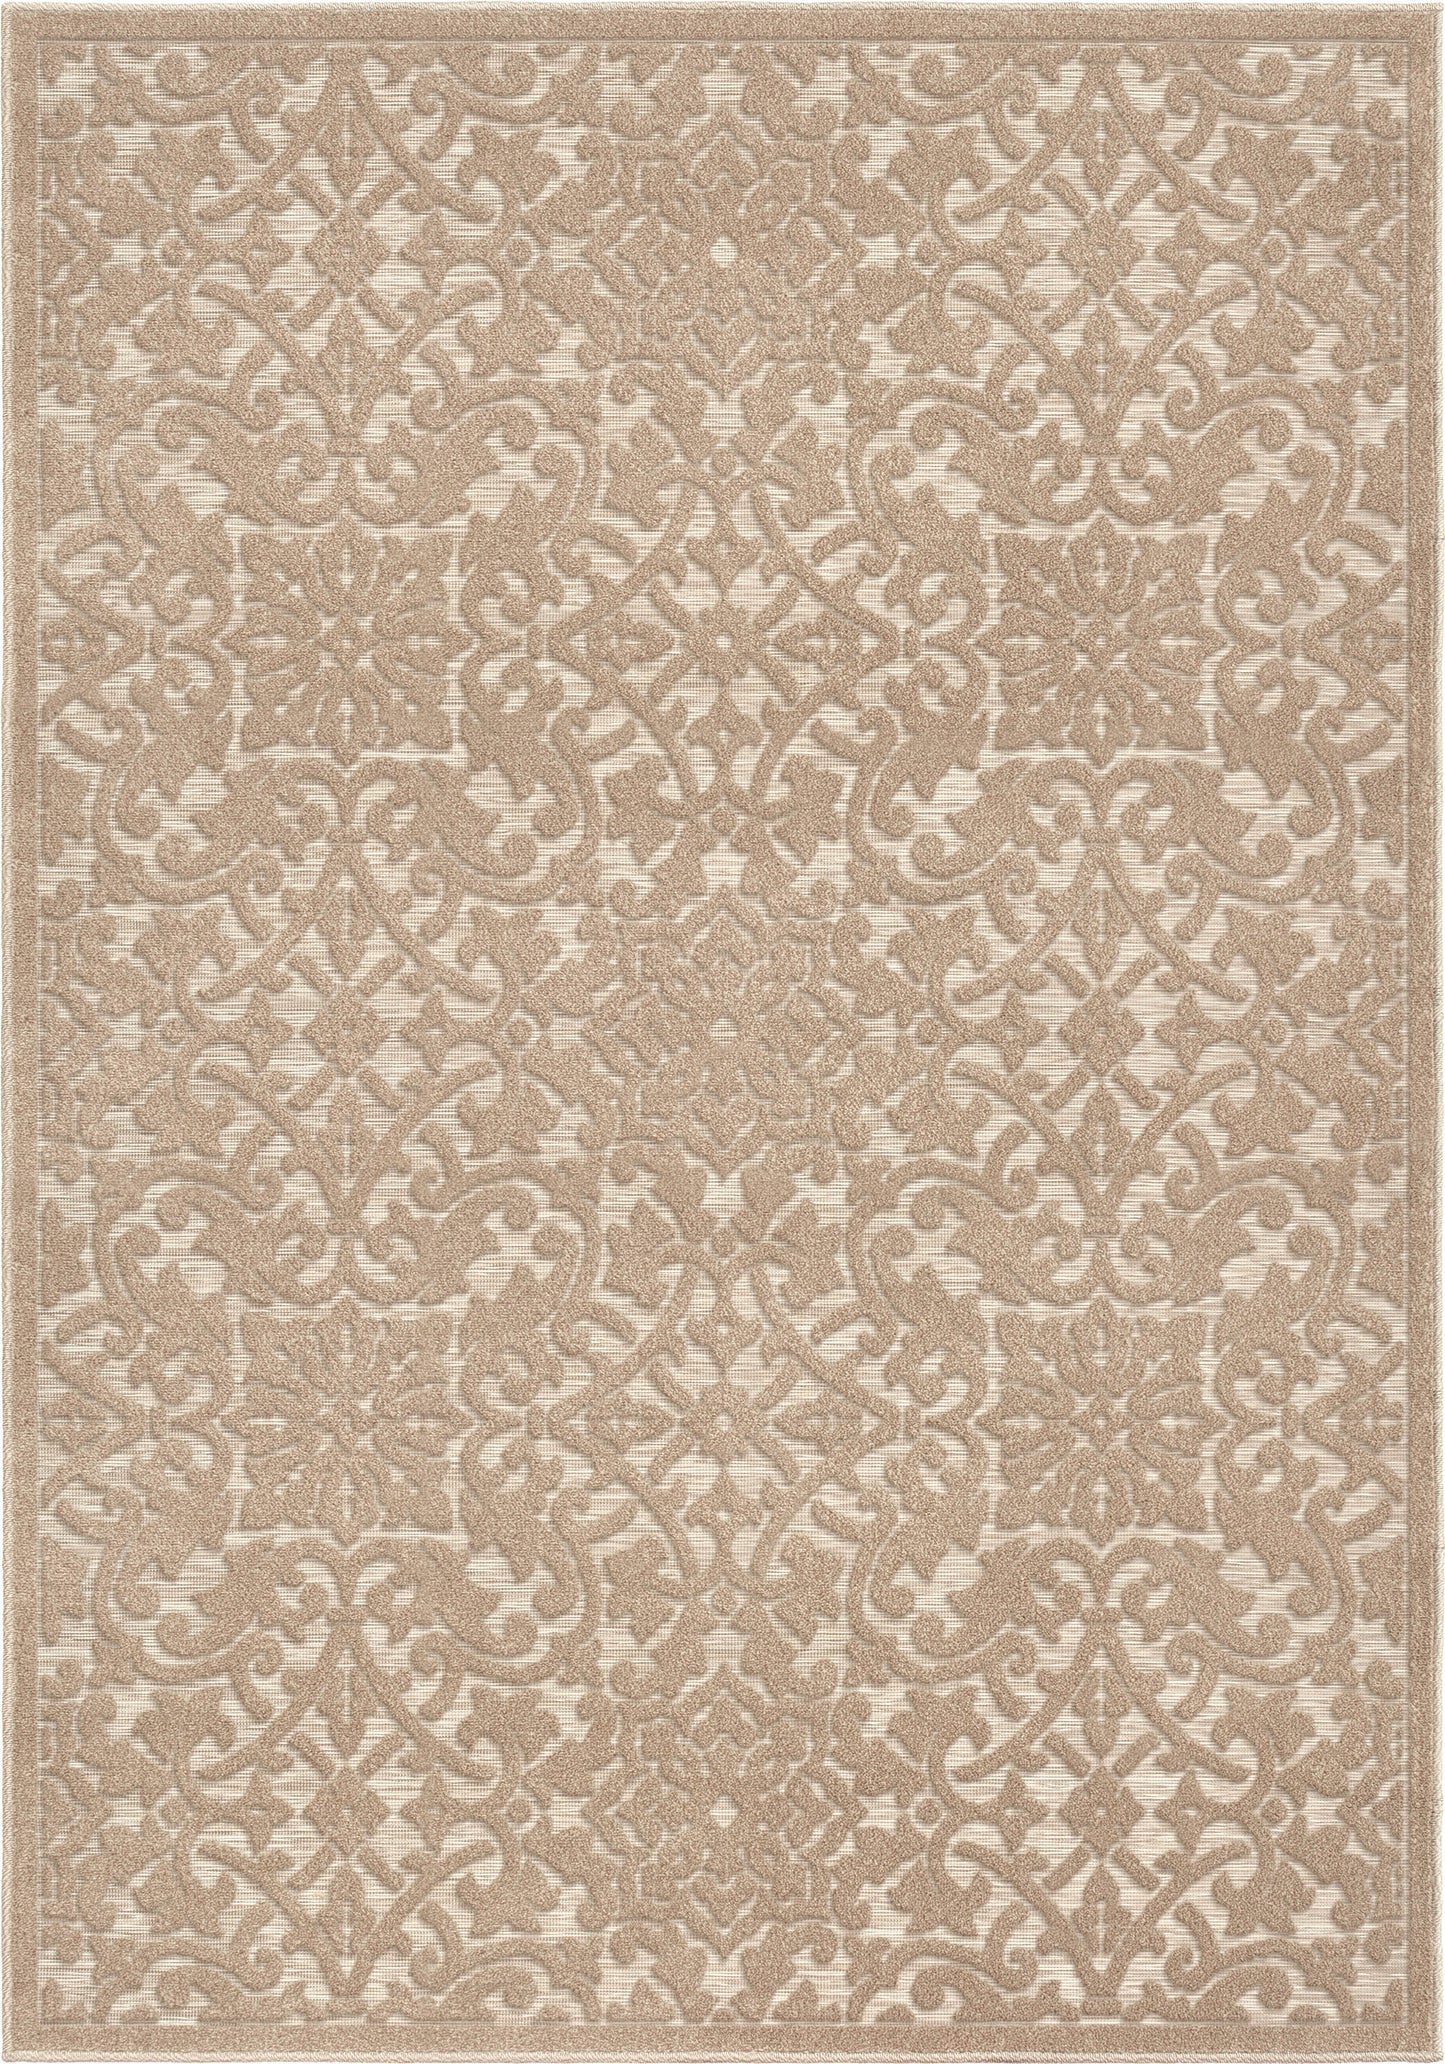 Orian Rugs Boucle' Biscay BCL/BISC Driftwood Area Rug